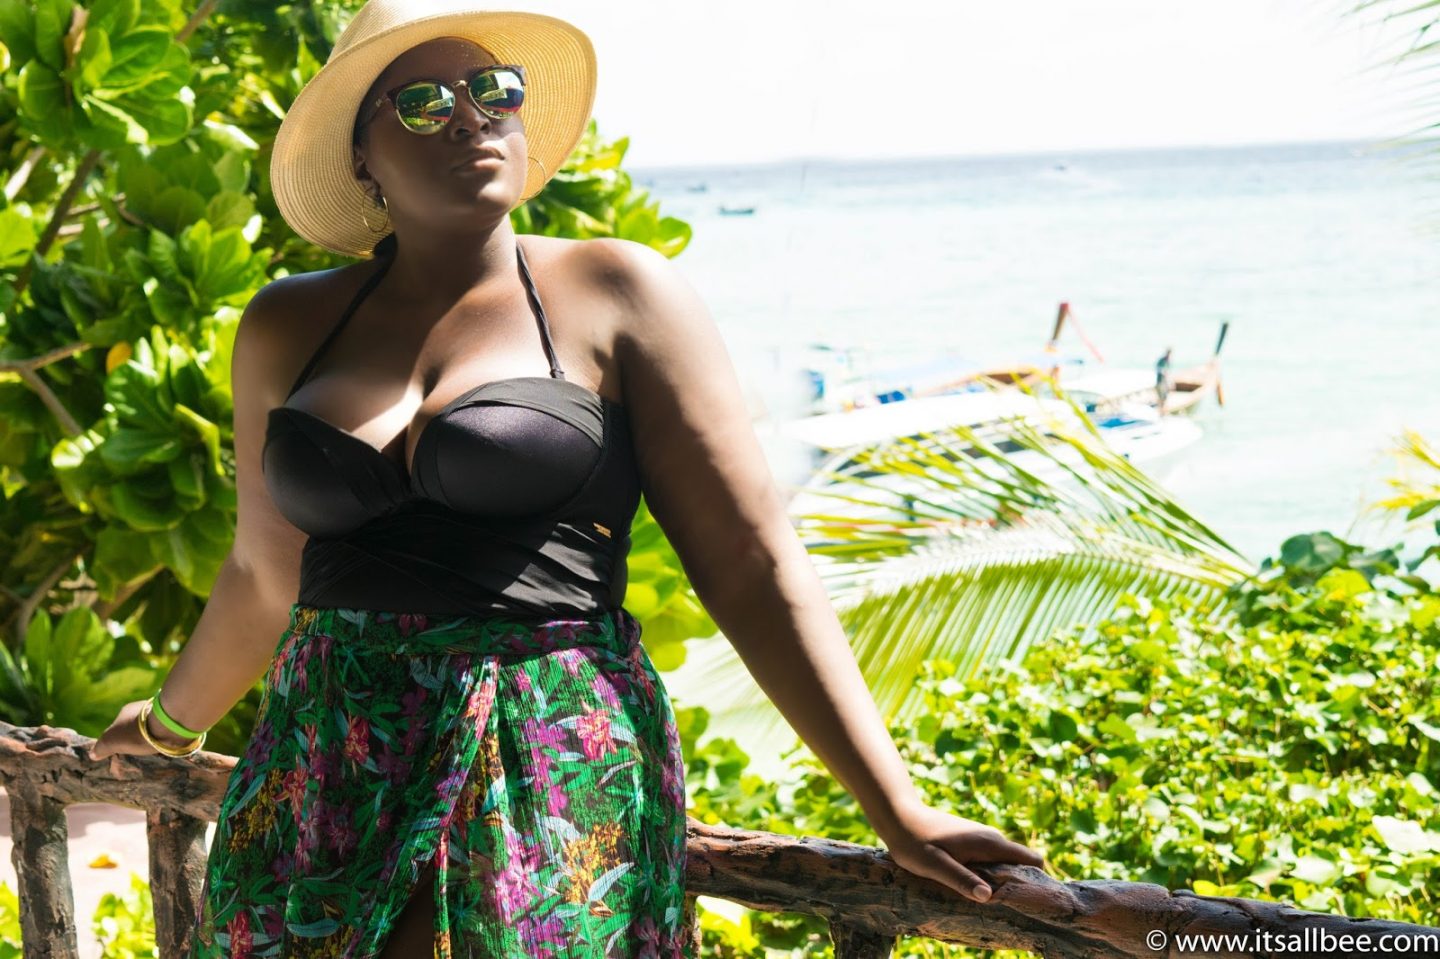 Stylish Beach Cover-ups You Need To Pack For Next Vacation